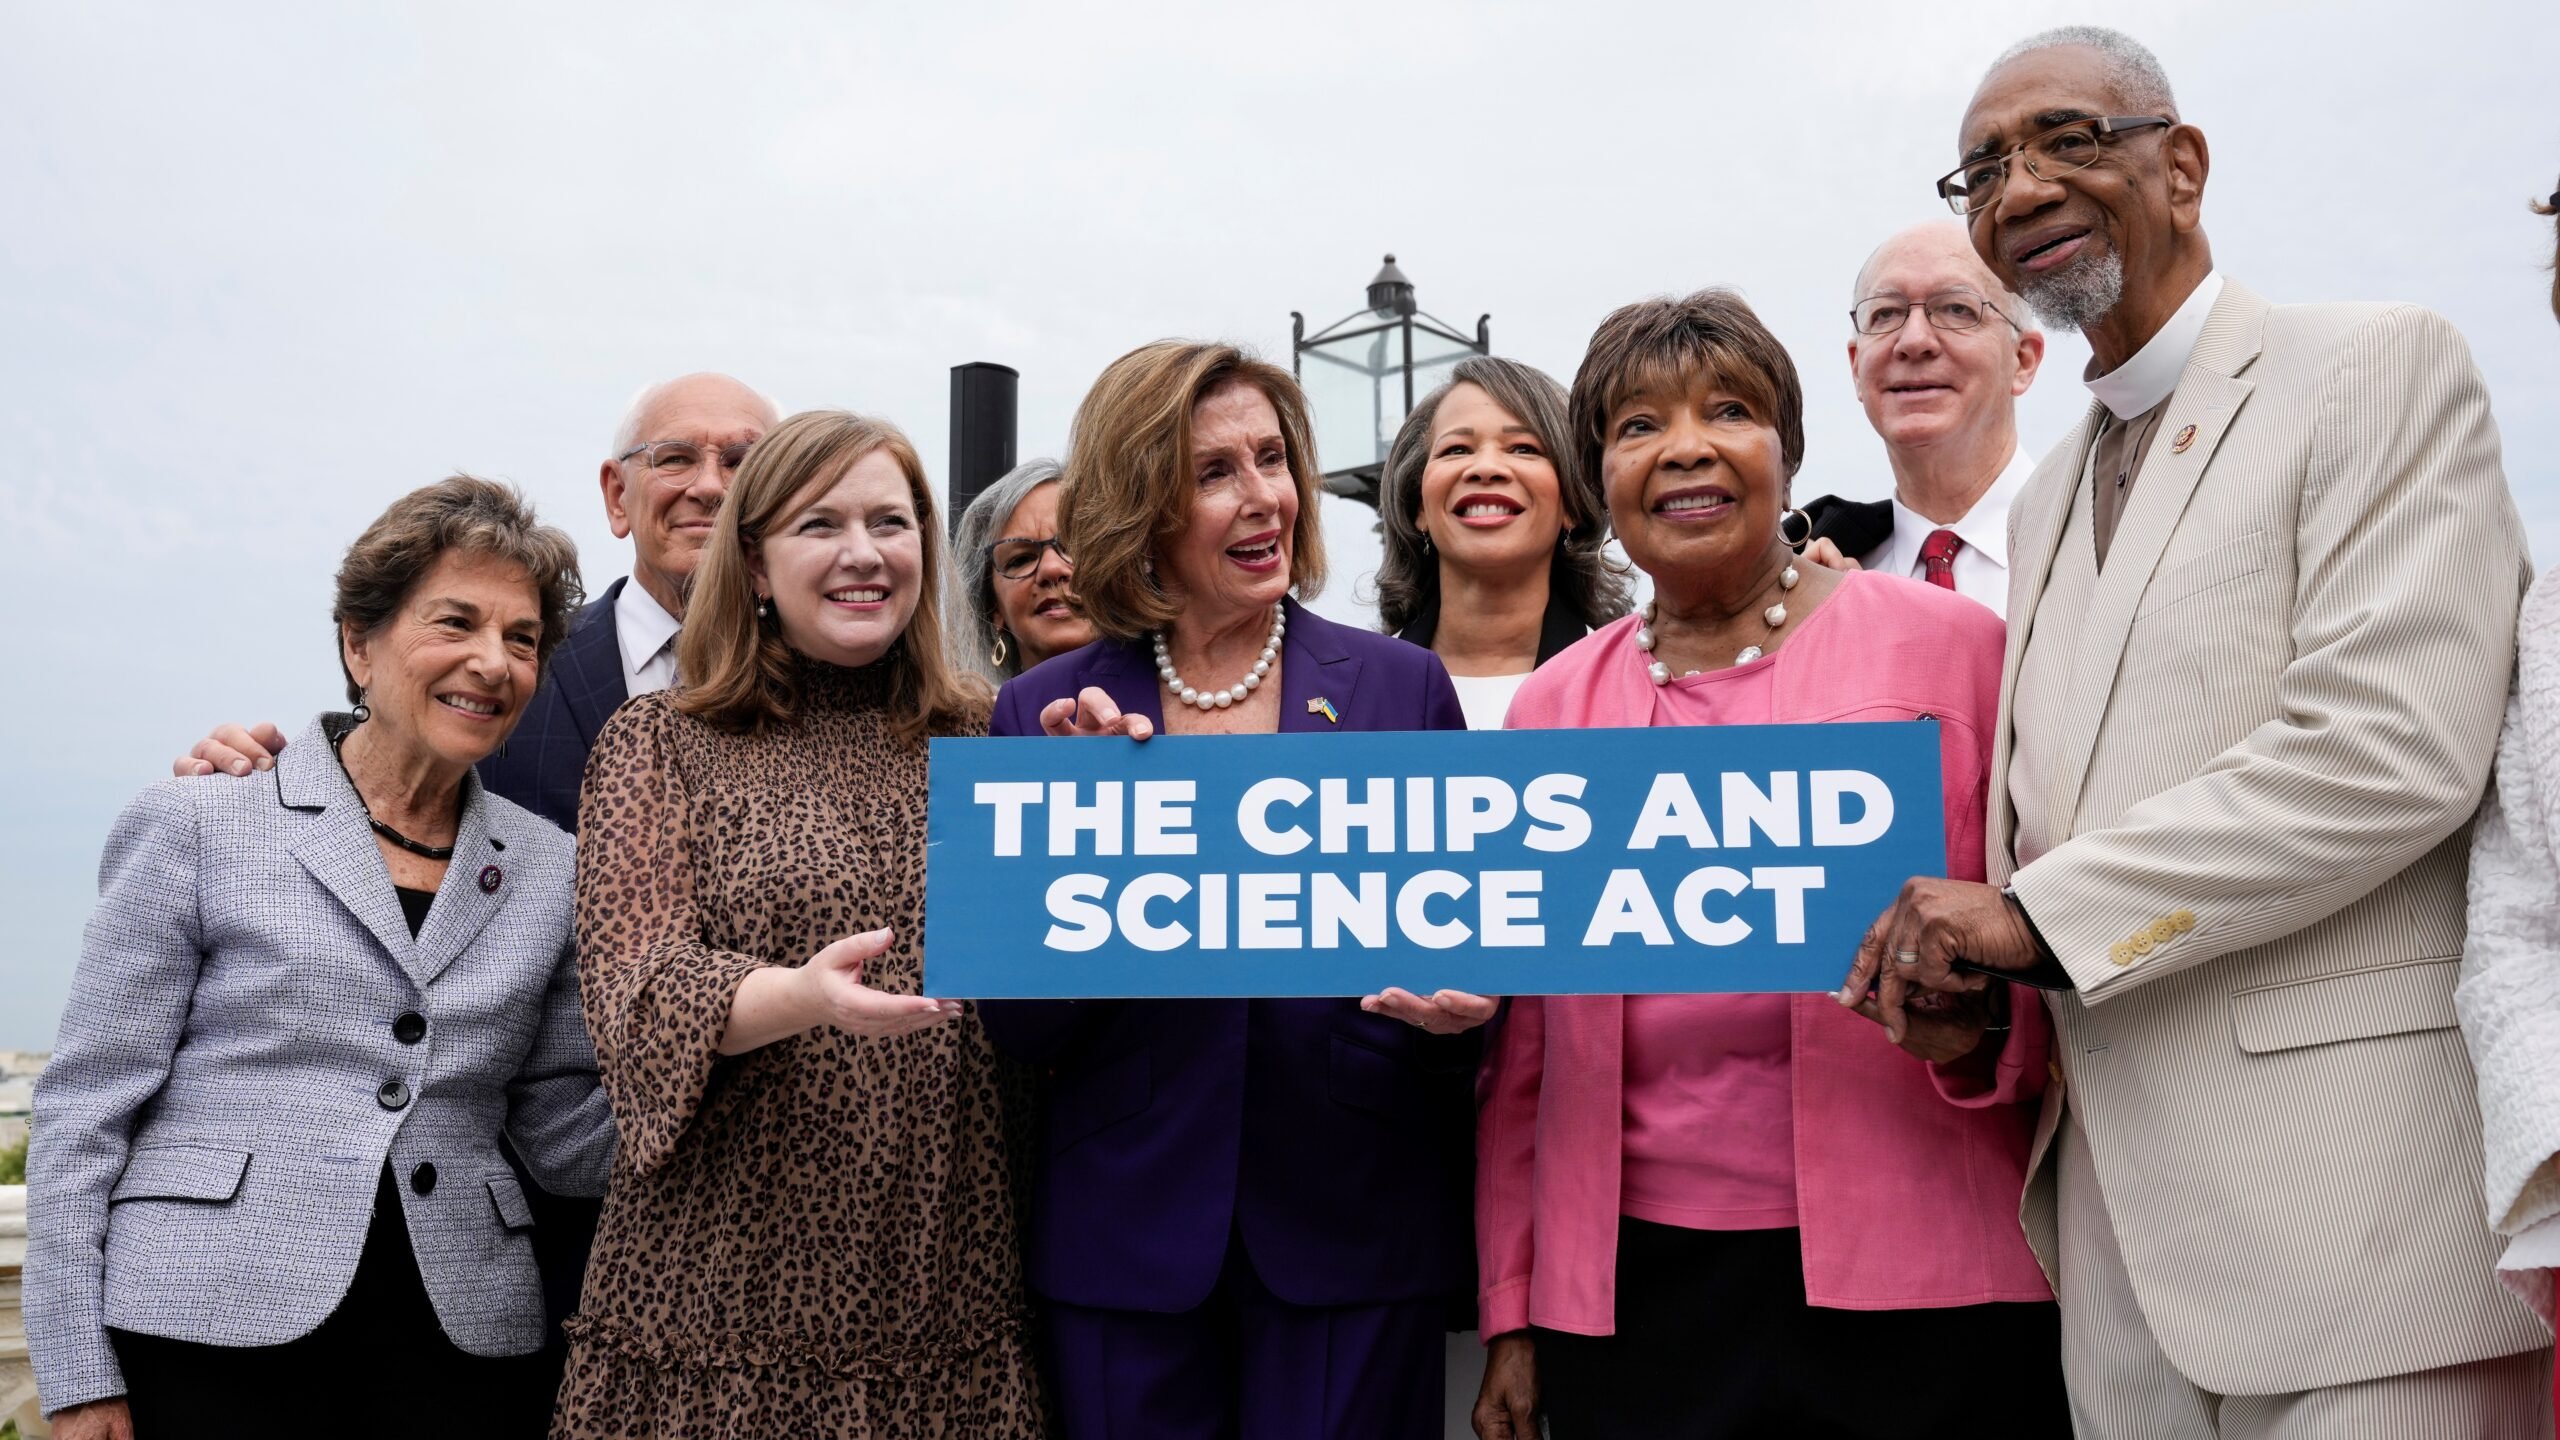 Speaker Pelosi Holds Bill Enrollment For The CHIPS And Science Act